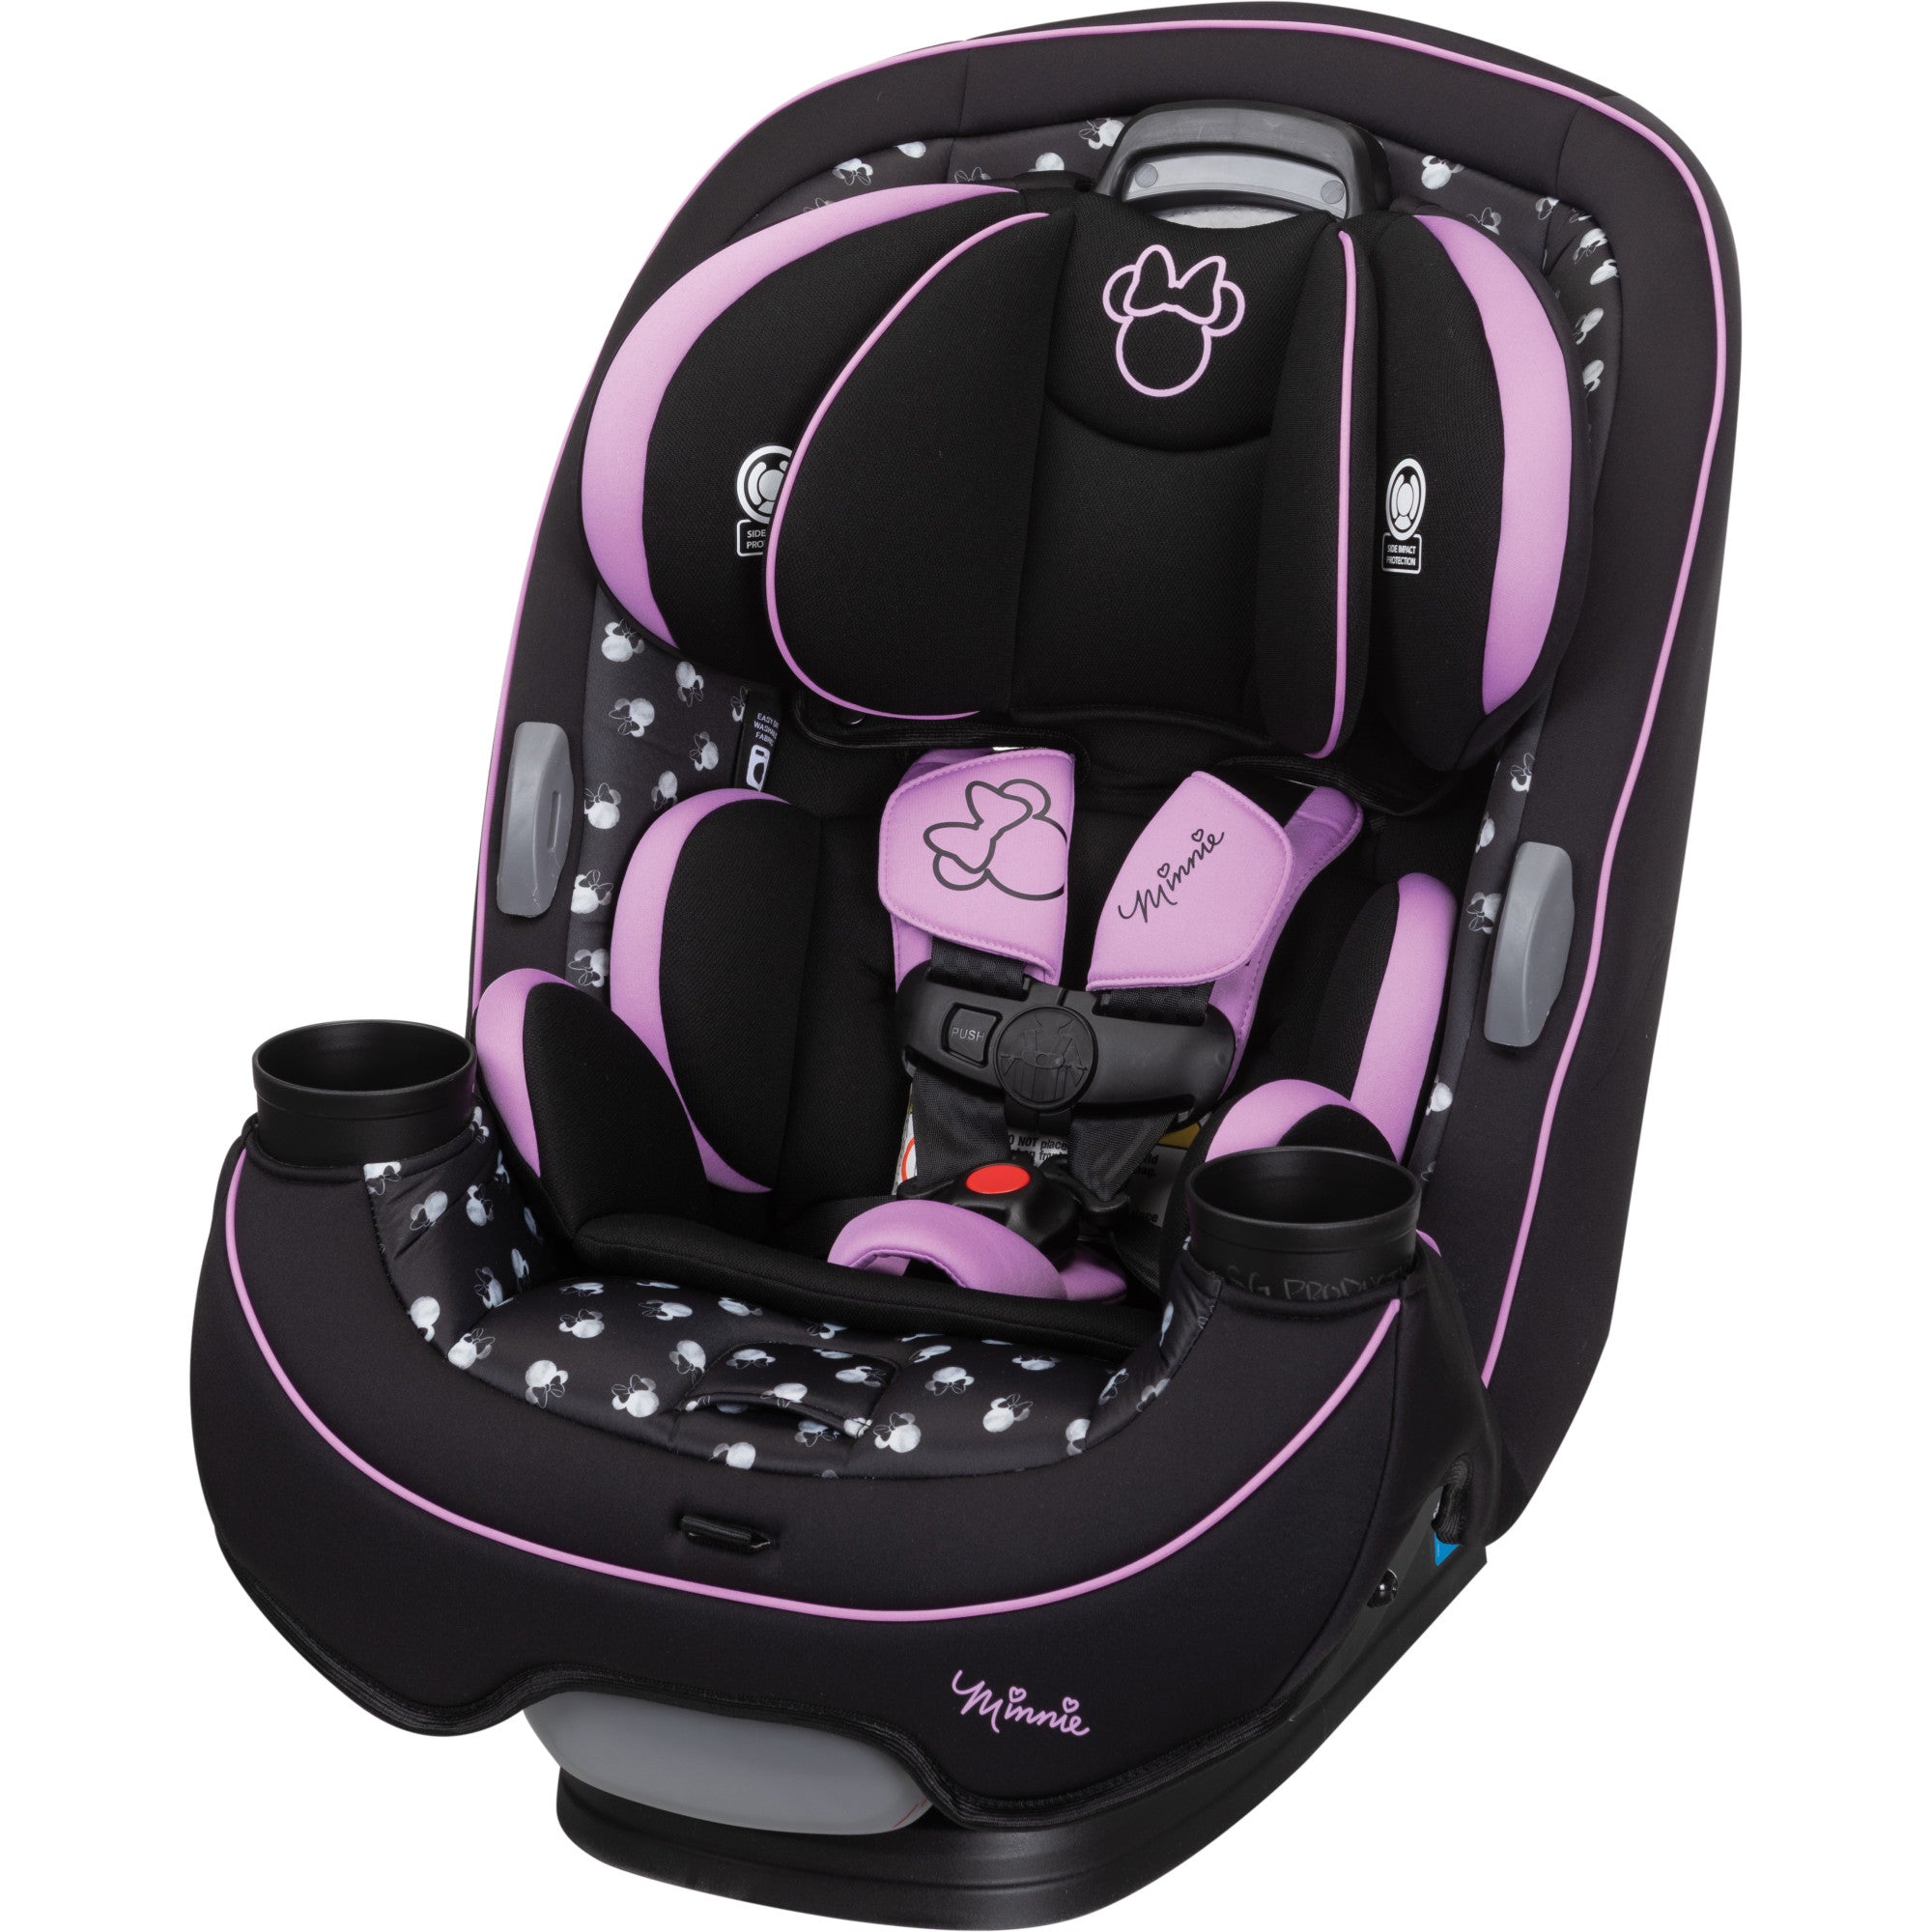 Disney Baby Grow and Go™ All-in-One Convertible Car Seat - Midnight Minnie